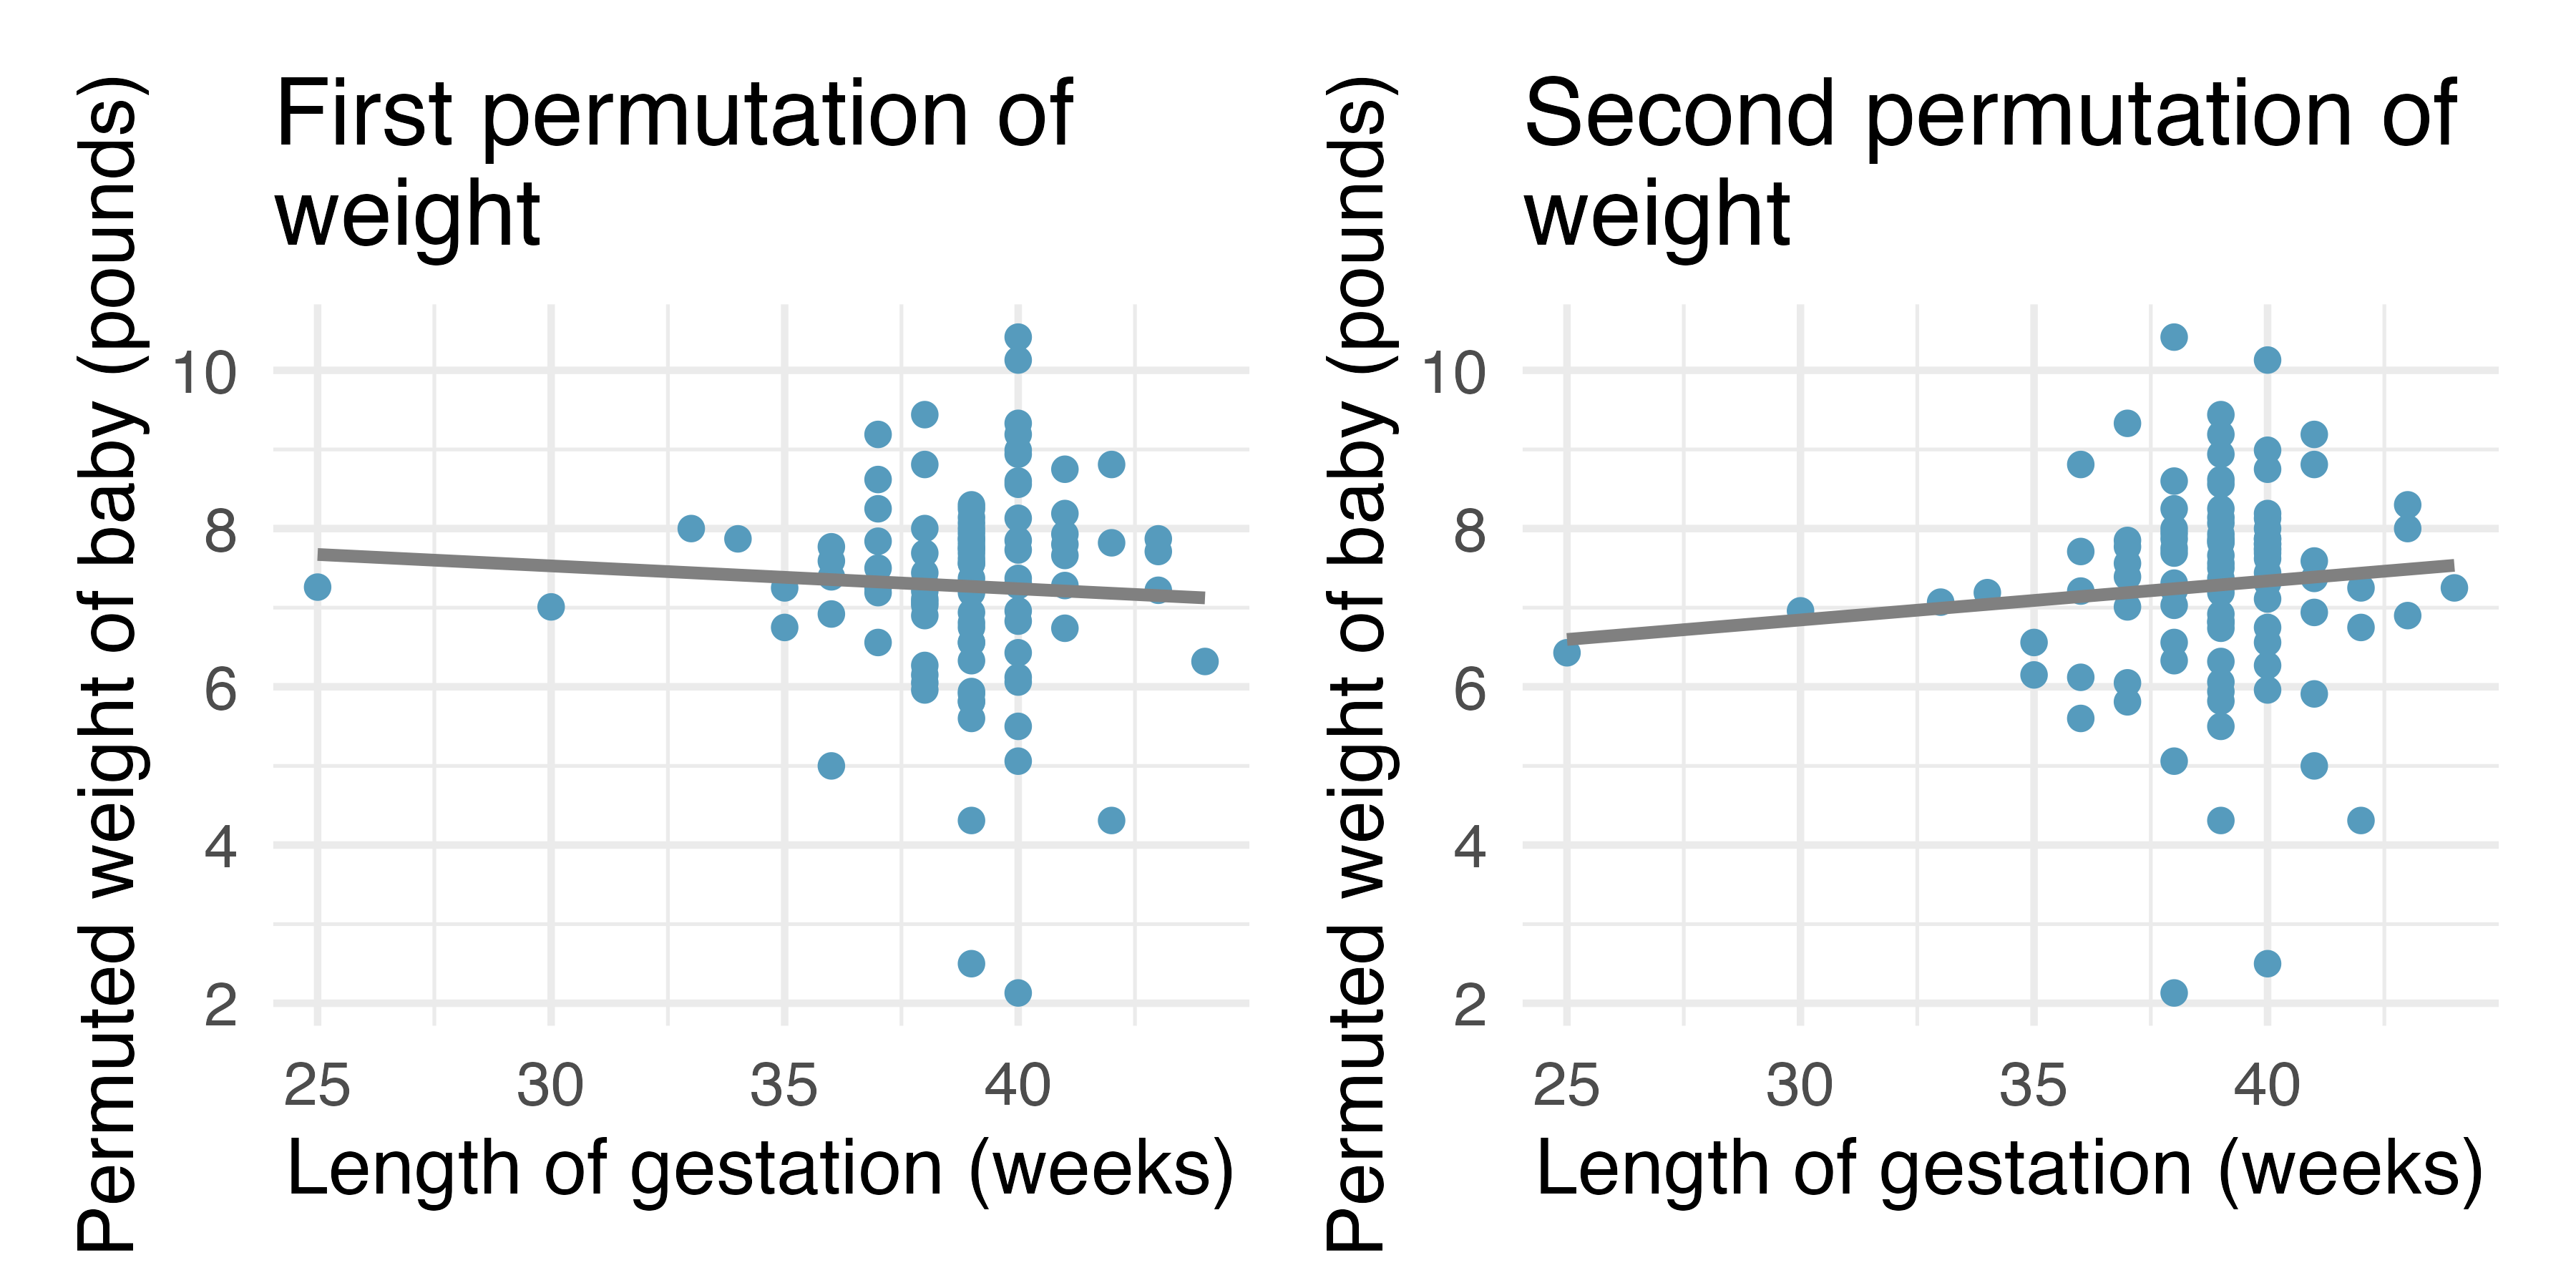 Two different permutations of the weight variable with slightly different least squares regression lines.